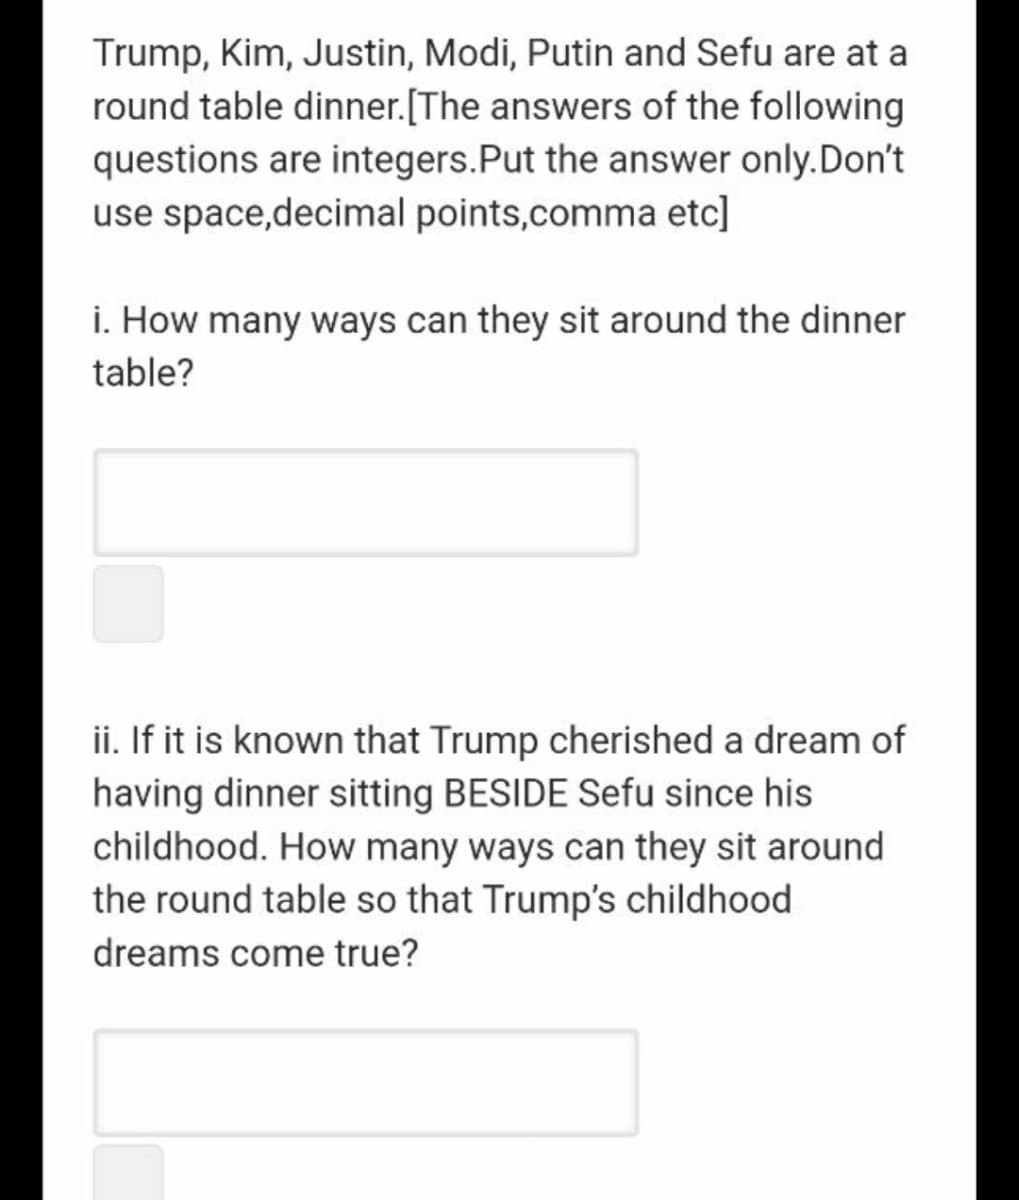 Trump, Kim, Justin, Modi, Putin and Sefu are at a
round table dinner.[The answers of the following
questions are integers.Put the answer only.Don't
use space,decimal points,comma etc]
i. How many ways can they sit around the dinner
table?
ii. If it is known that Trump cherished a dream of
having dinner sitting BESIDE Sefu since his
childhood. How many ways can they sit around
the round table so that Trump's childhood
dreams come true?
